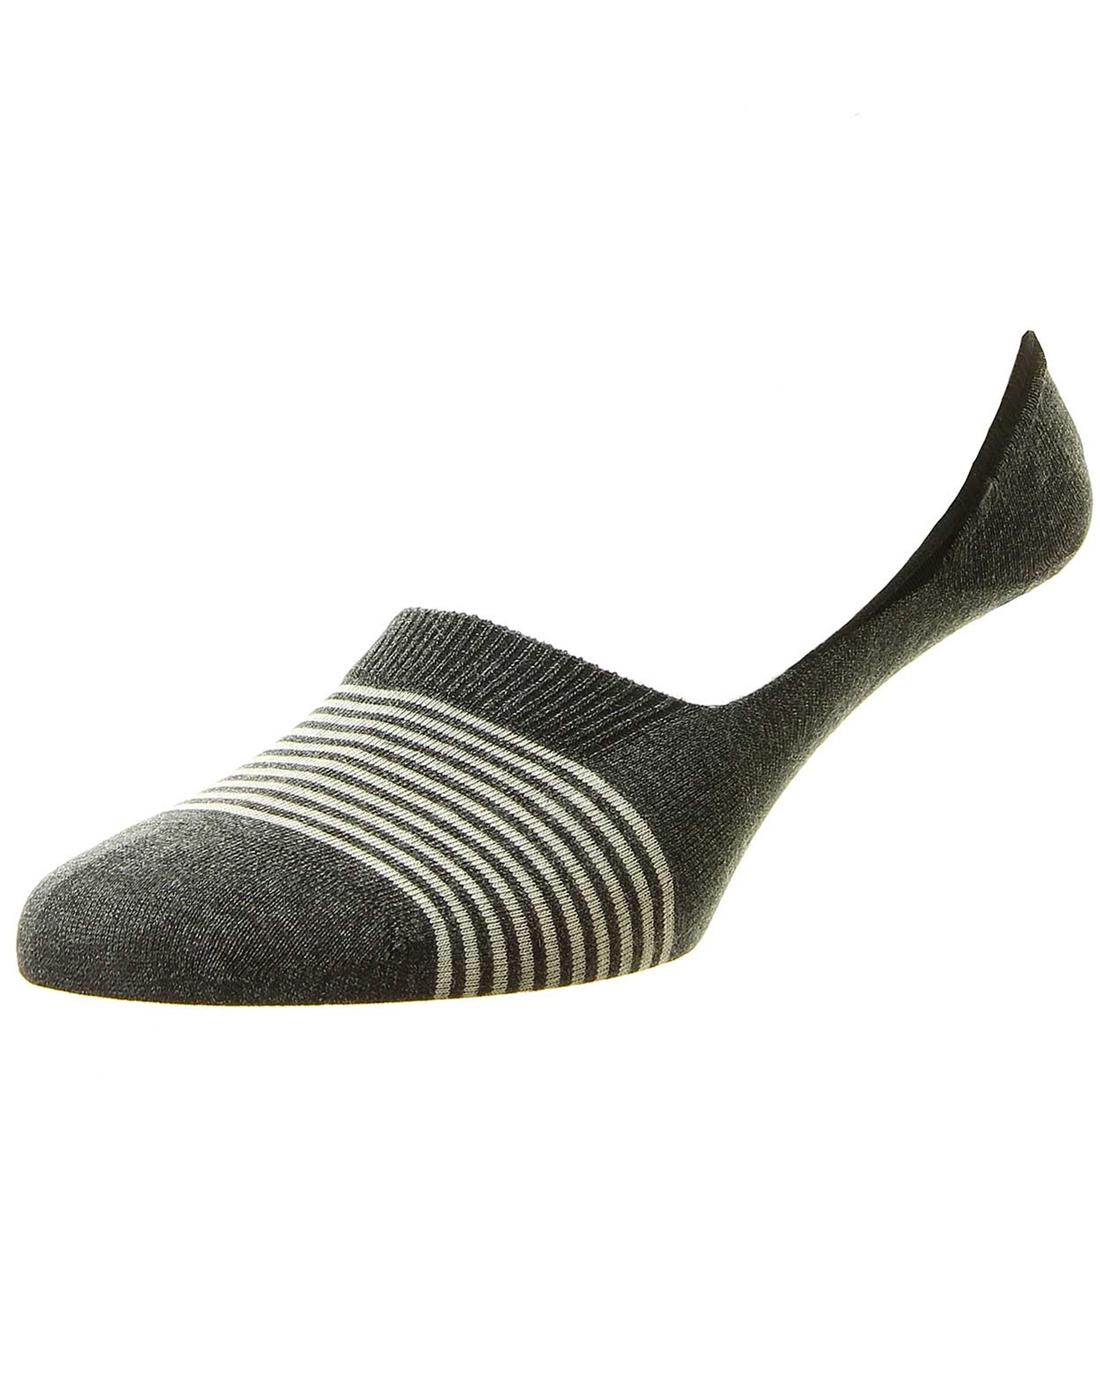 Pantherella Invisible Loafer Socks in Grey Stripe